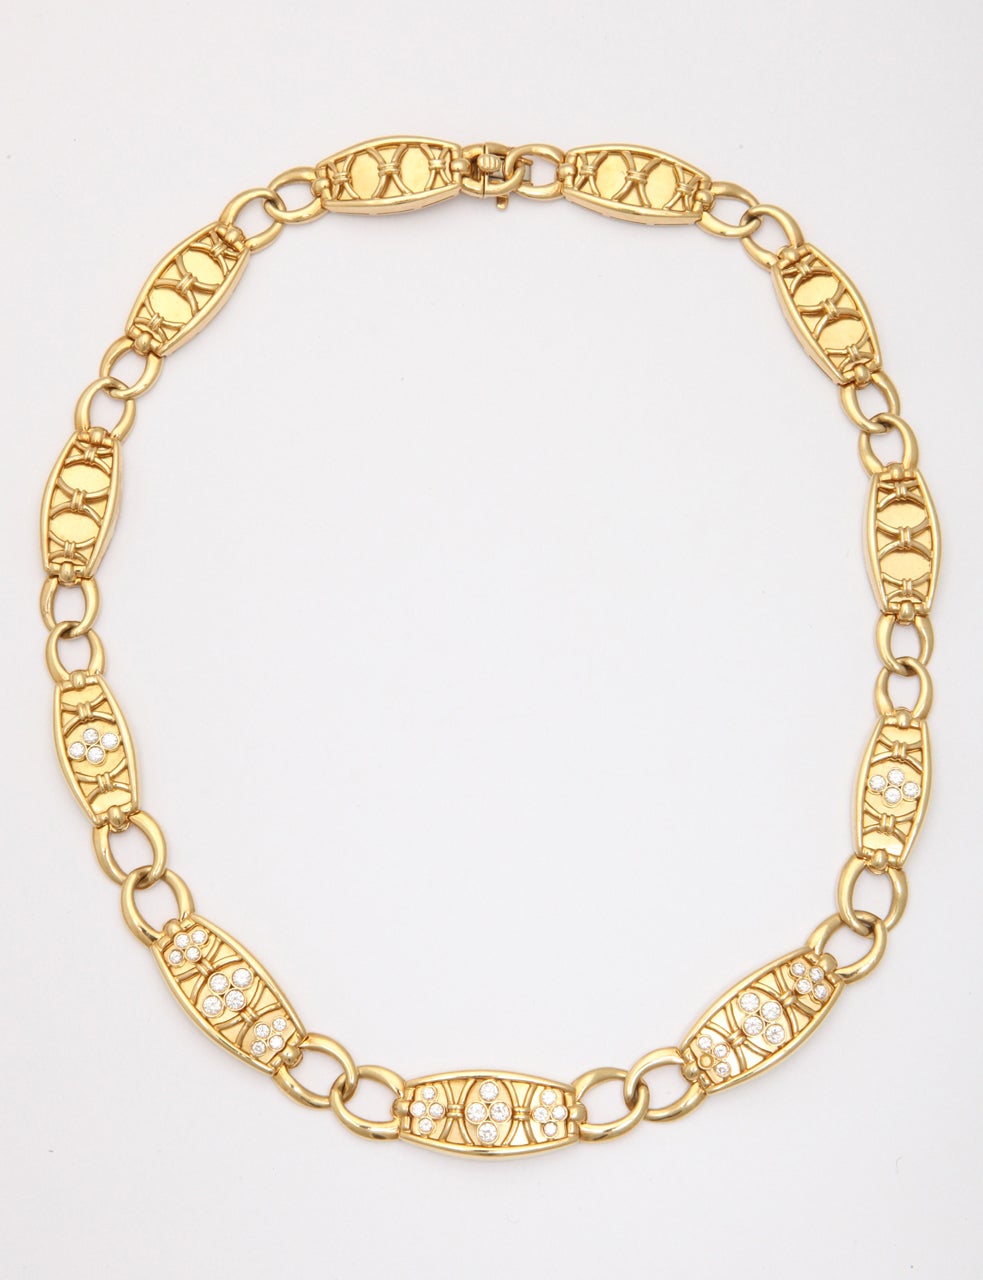 !8kt Yellow Gold Necklace.  Each link is connected with oval rings & is backed with gold.  Five links are bezel set with full cut Diamonds.